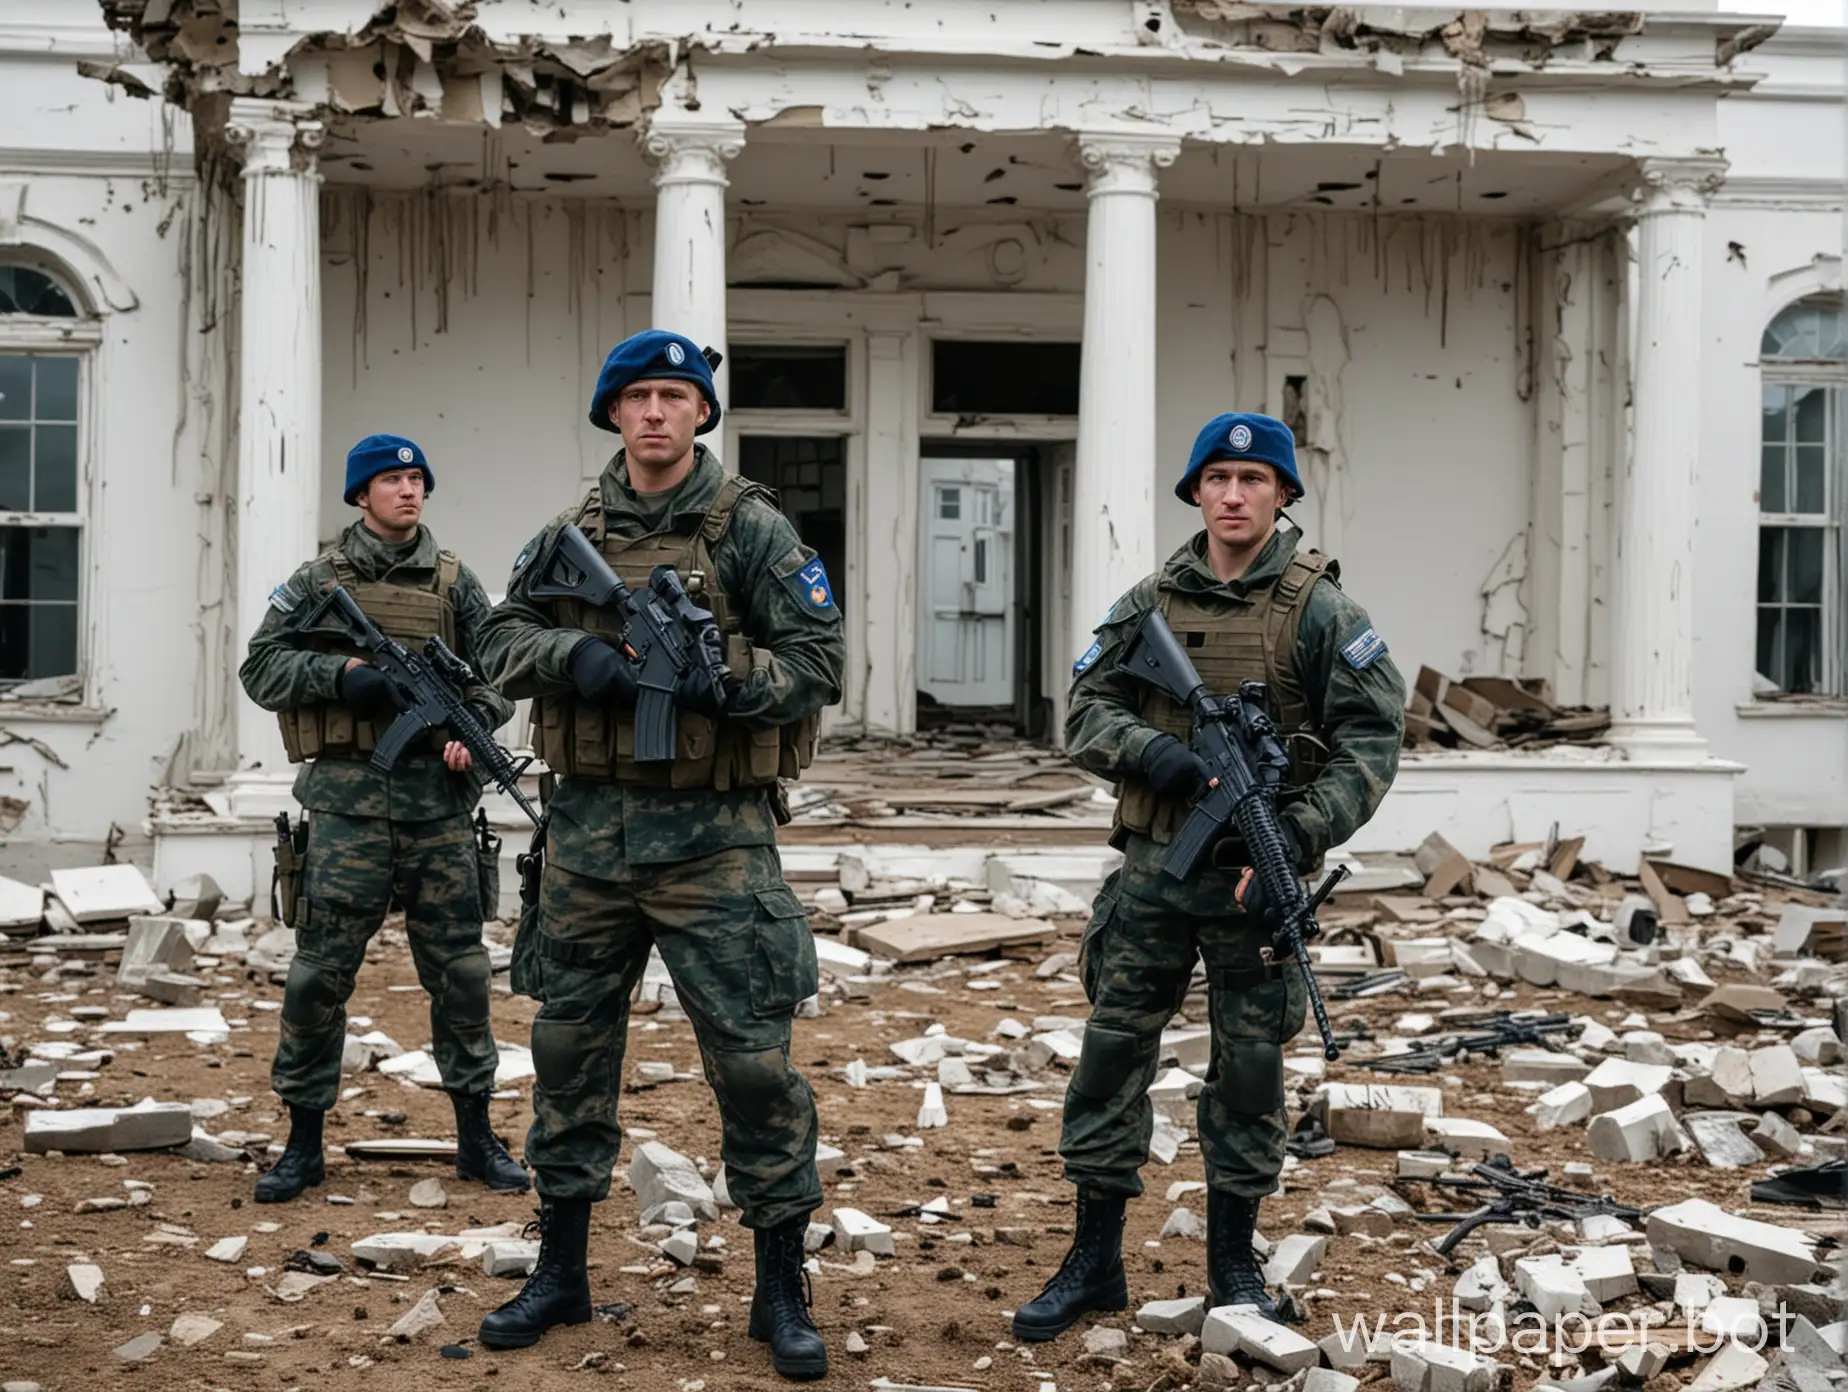 soldiers from vdv in blue berets with automatic weapons are standing in front of the ruined White House in Washington